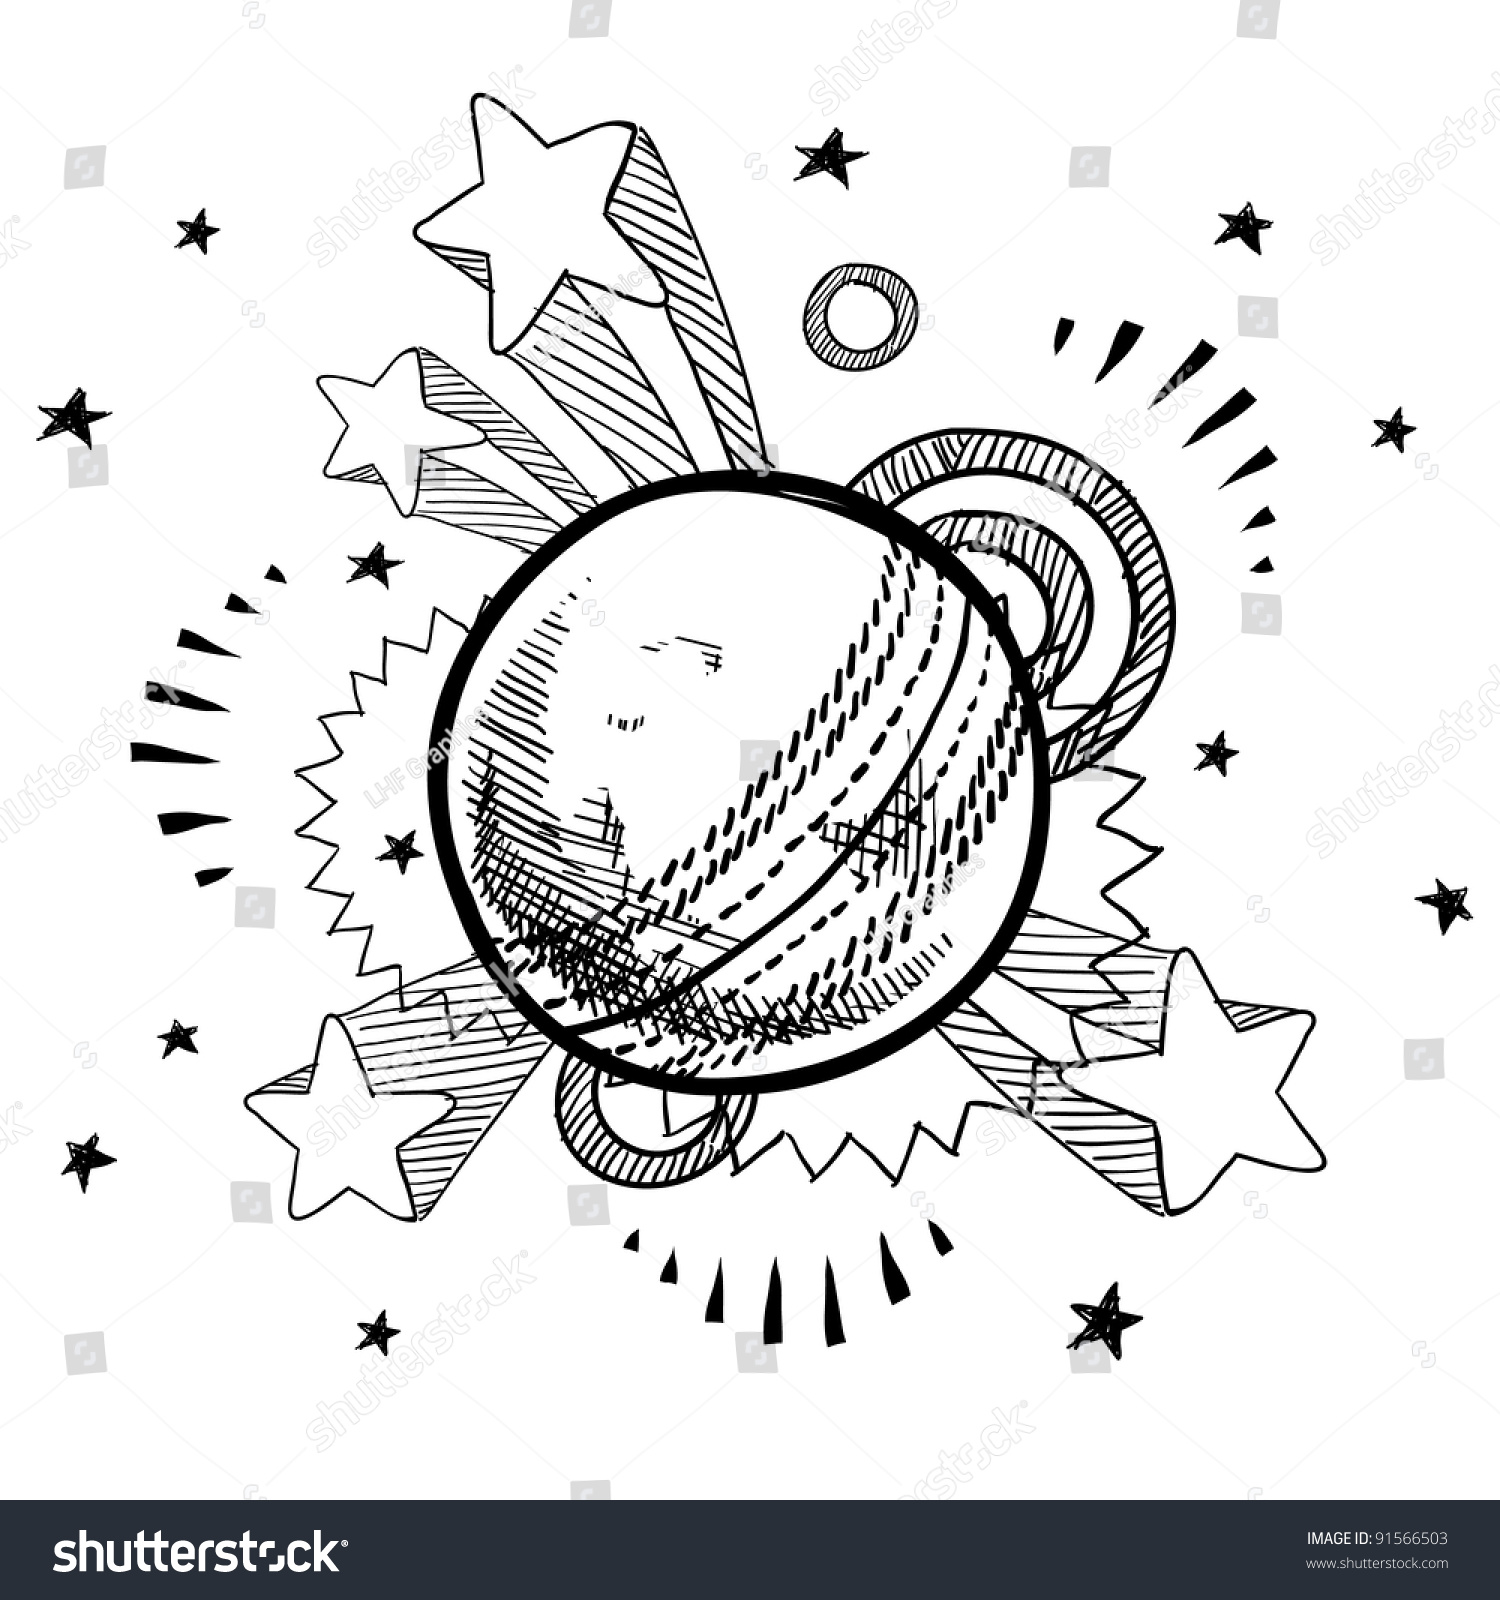 SVG of Doodle style cricket ball illustration in vector format with retro 1970s pop background svg